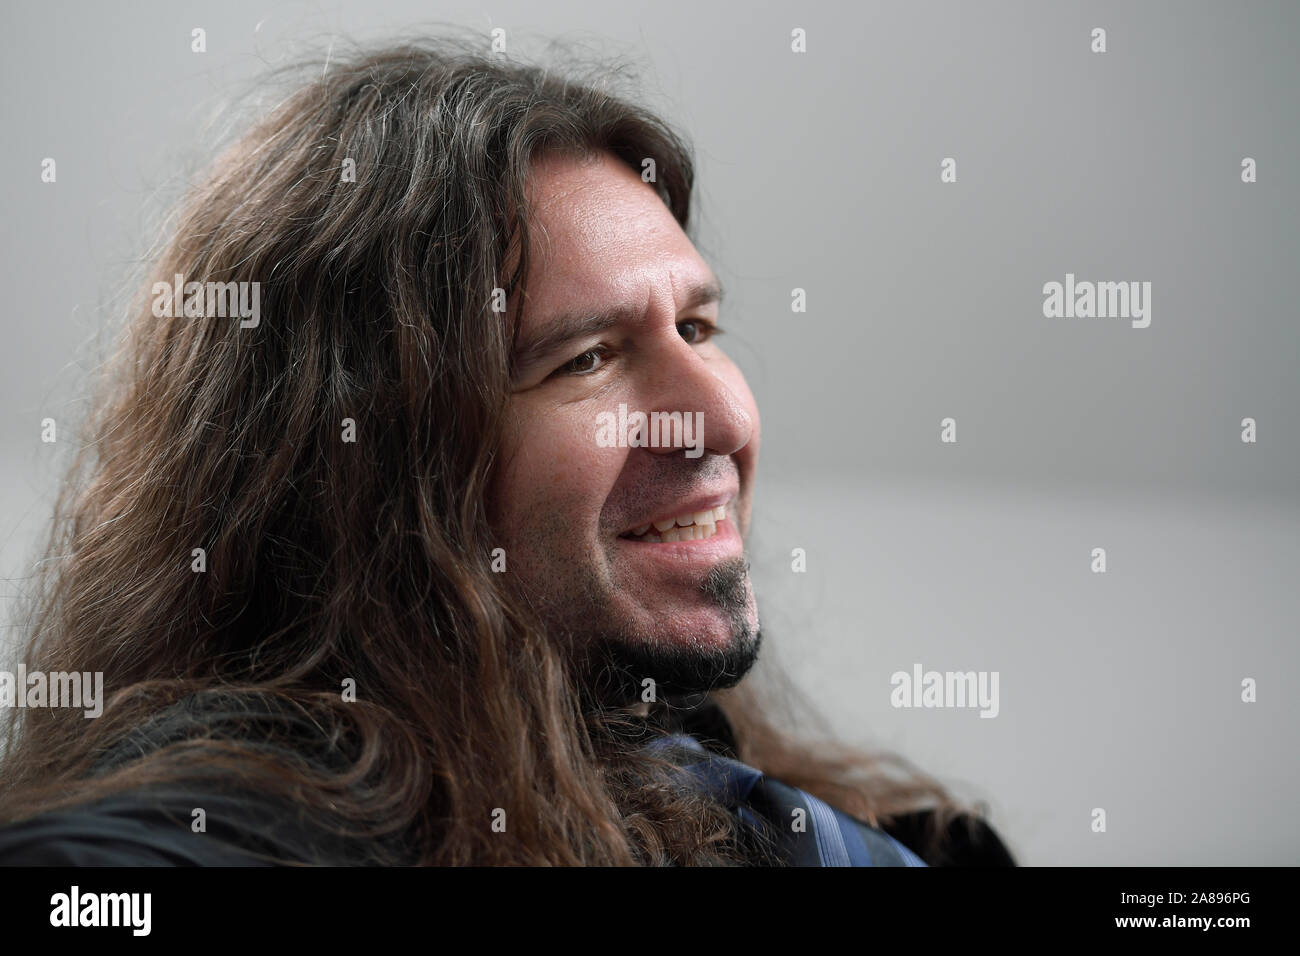 Prague, Czech Republic. 07th Nov, 2019. Greek-Canadian musician Phil Theofilos Xenidis, known as Phil X, speaks during an interview for the Czech News Agency (CTK) in Prague, Czech Republic, on November 7, 2019. Phil X plays with the Bon Jovi music band. Credit: Ondrej Deml/CTK Photo/Alamy Live News Stock Photo